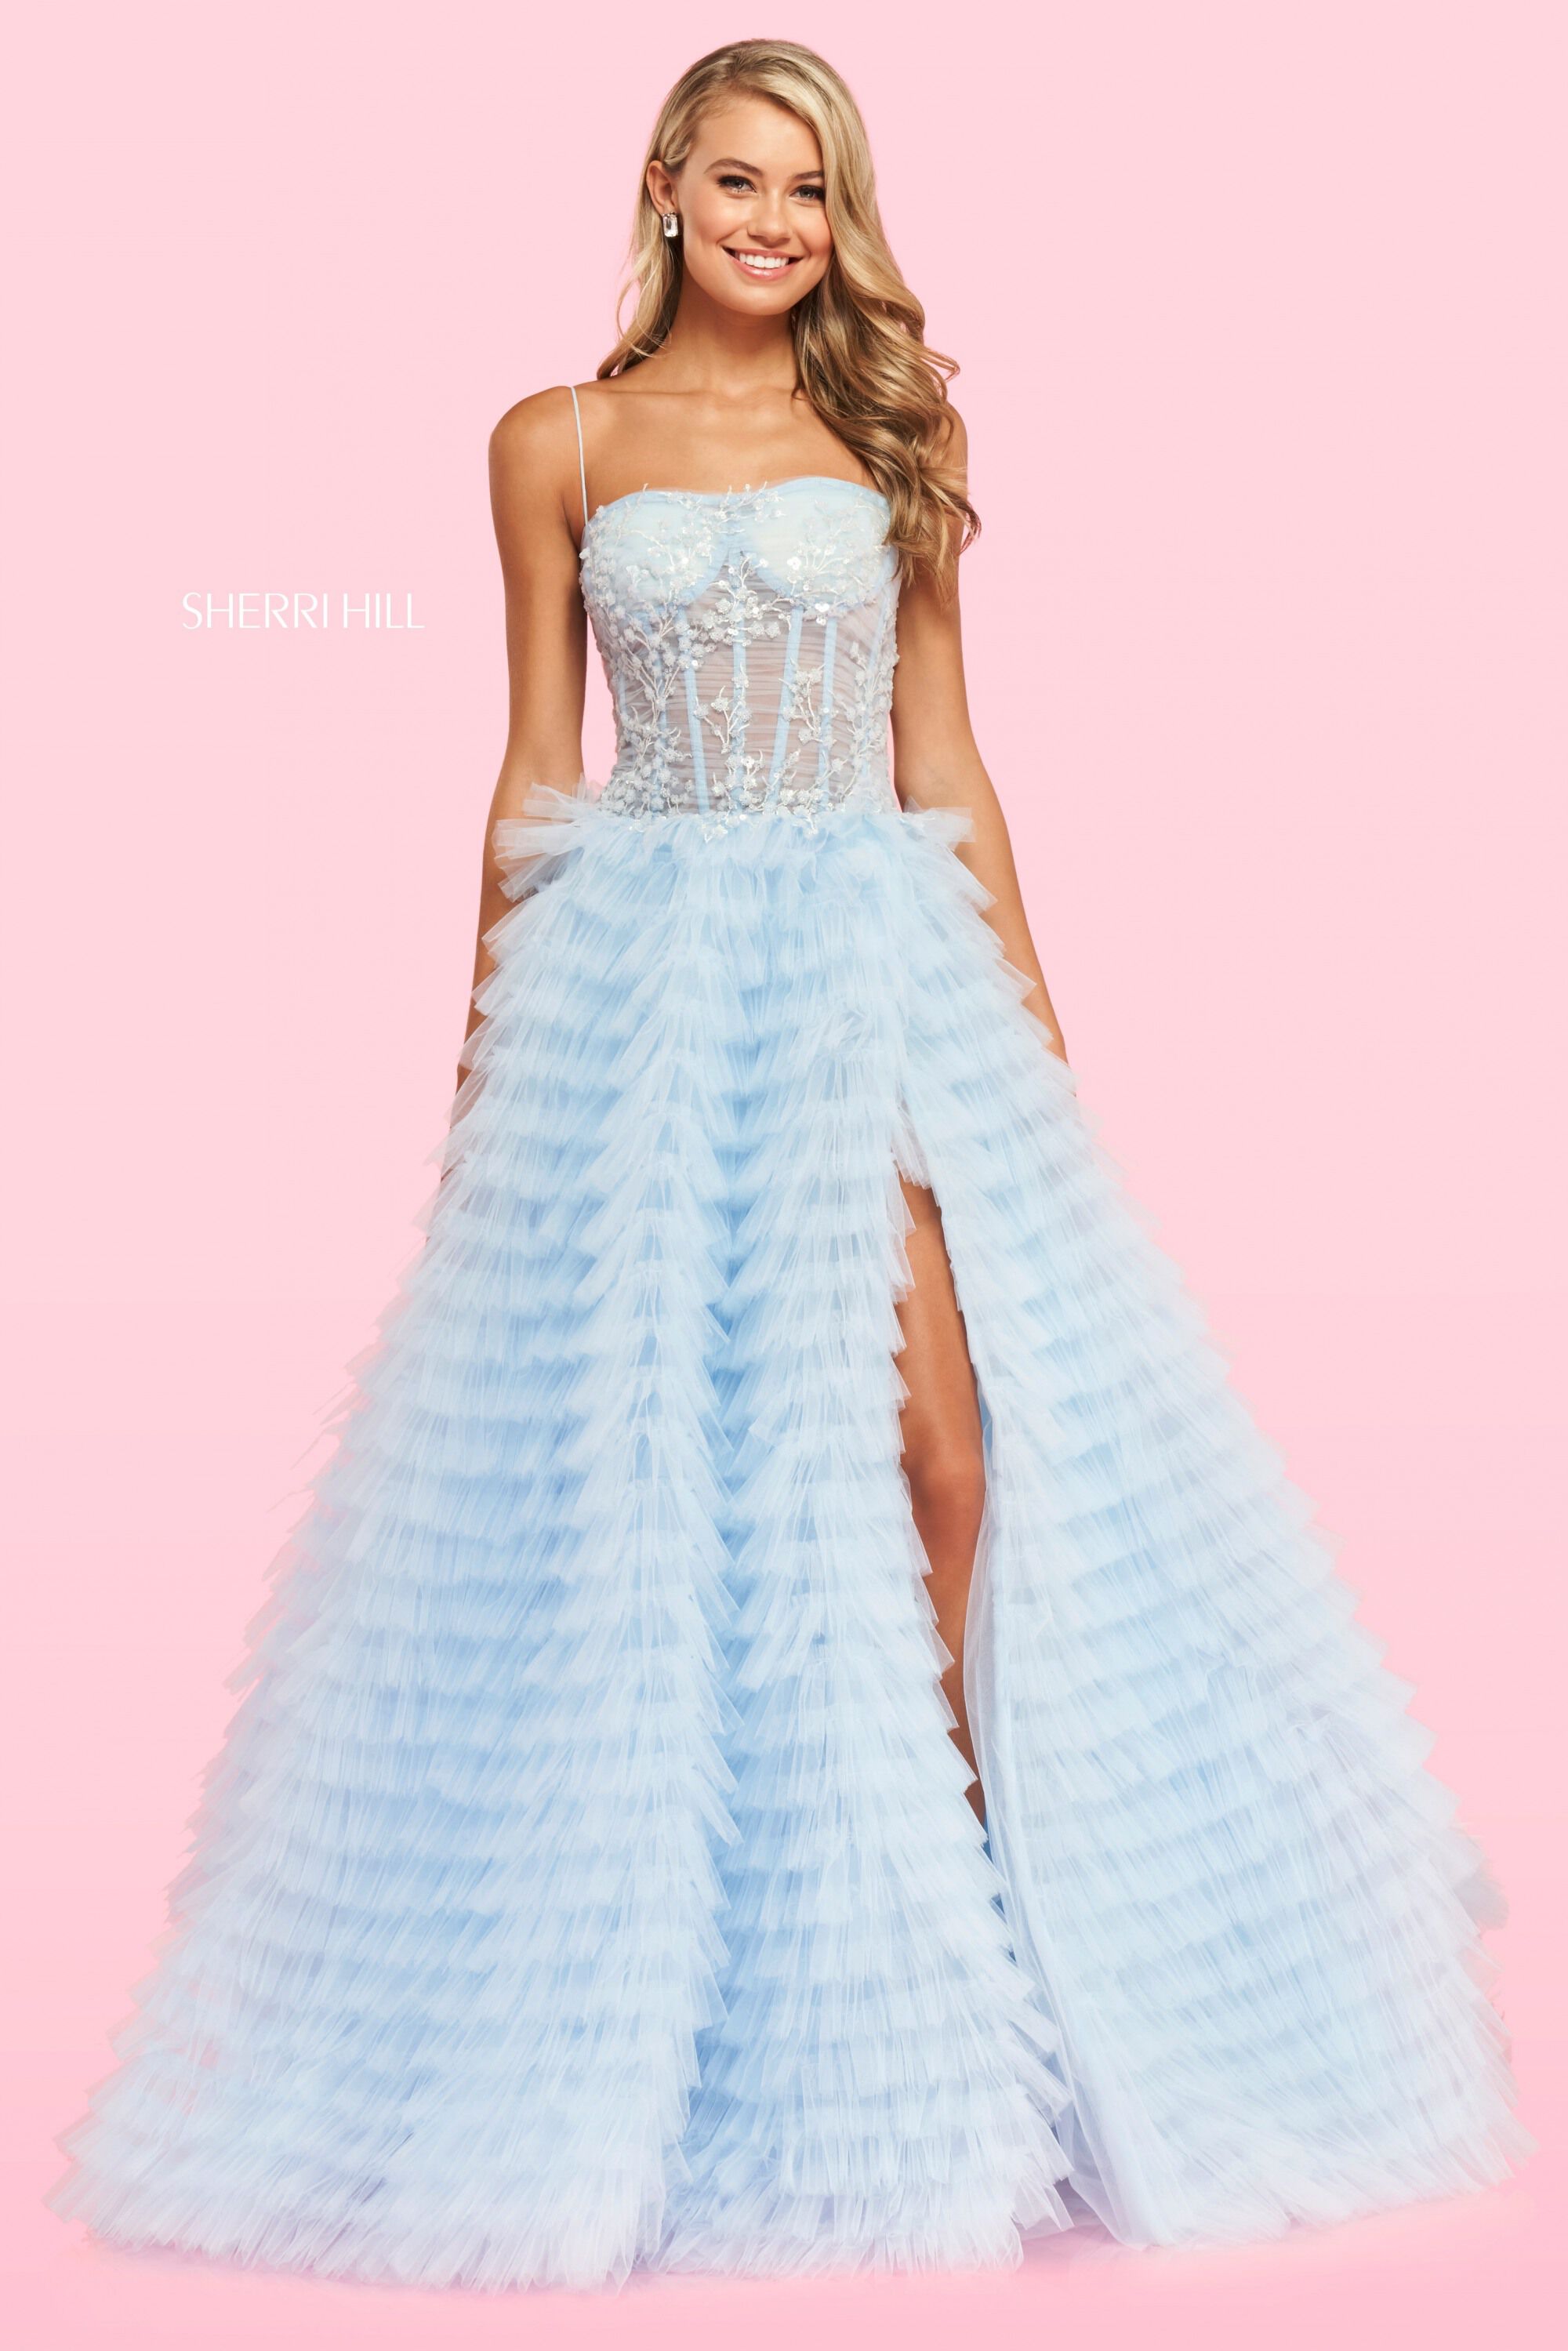 style № 54189 designed by SherriHill